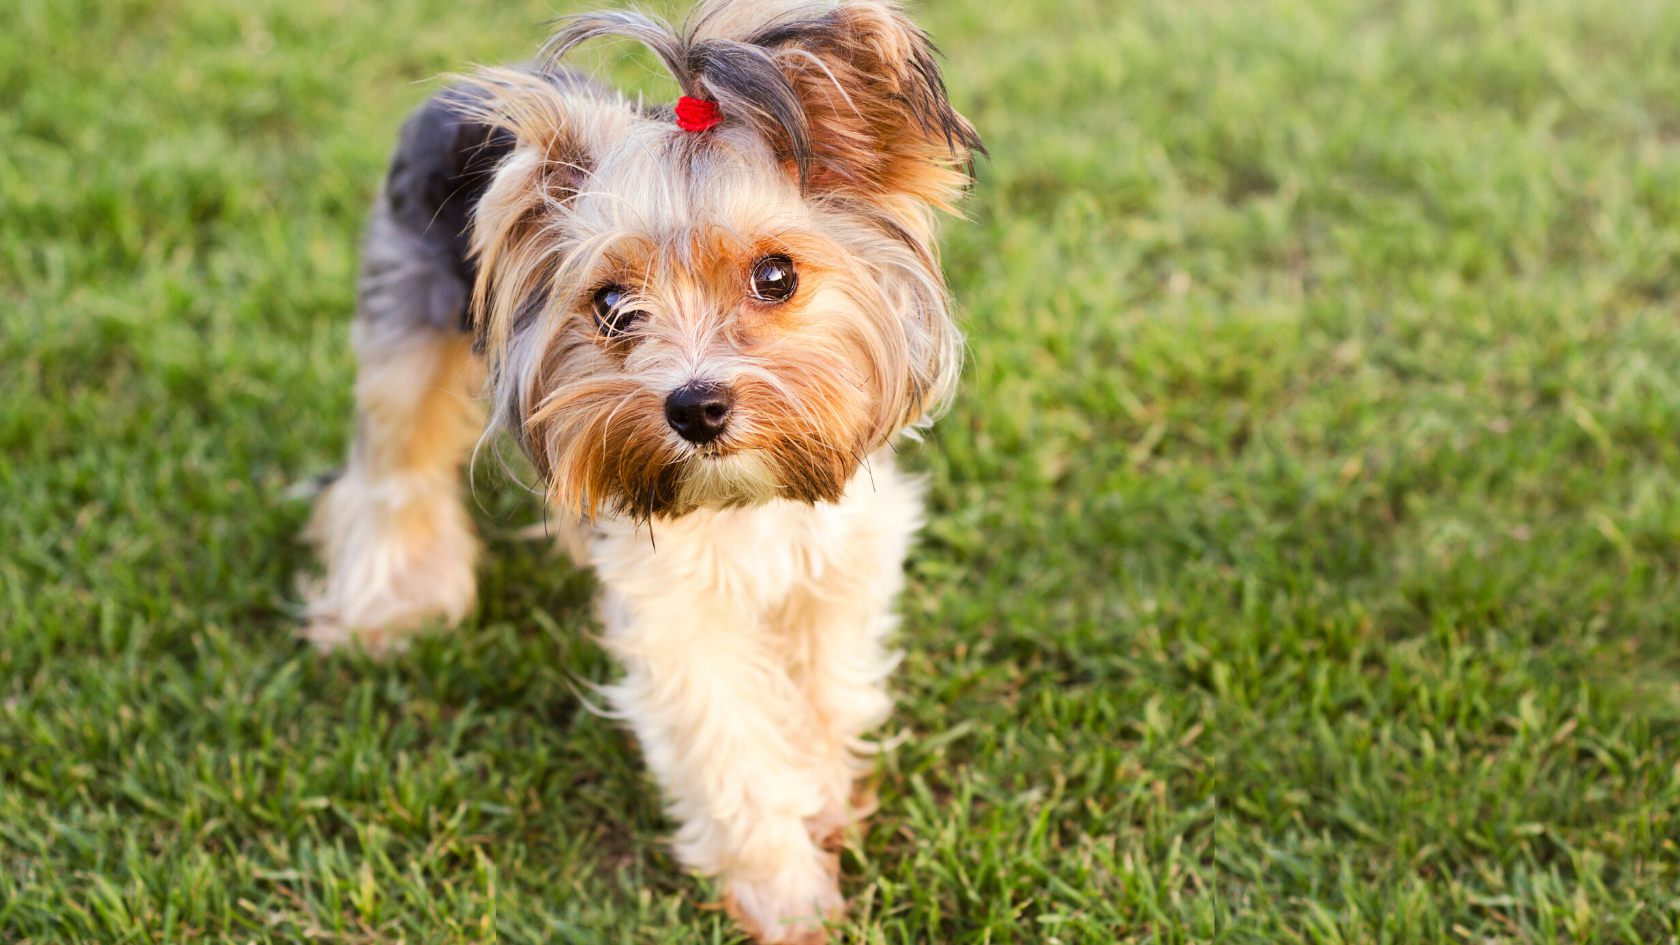 What Dogs are more Prone to Pancreatitis